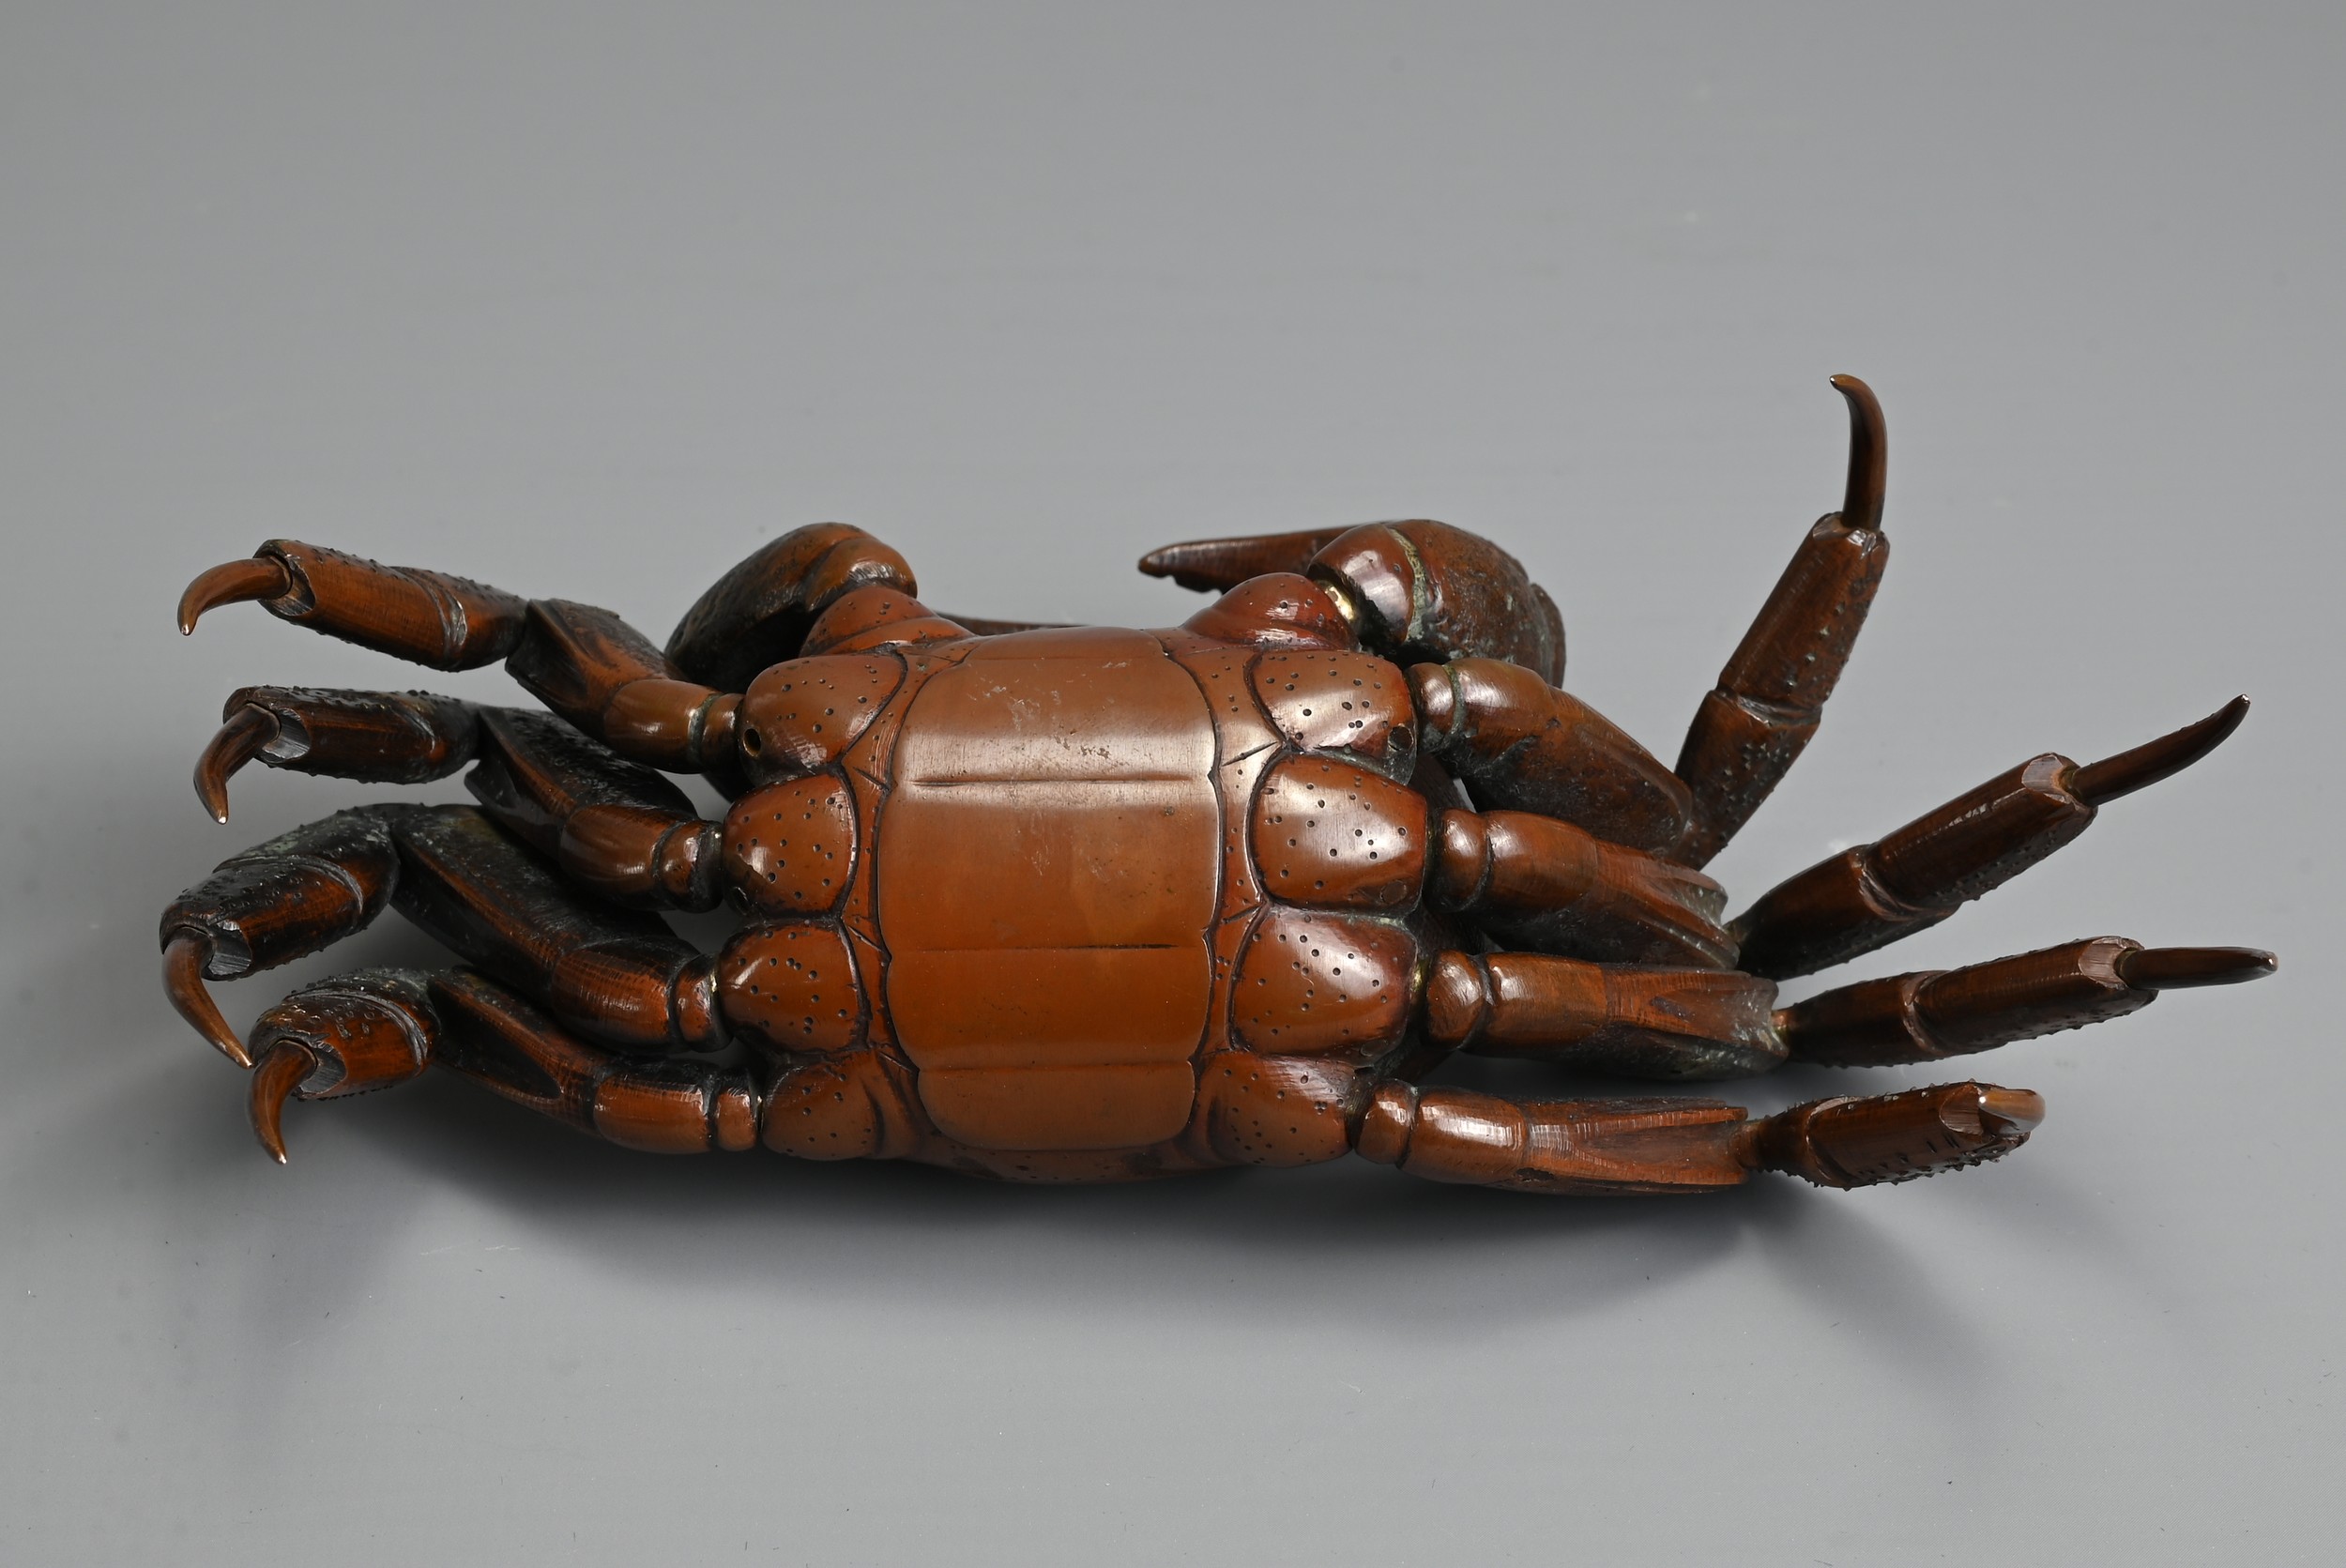 A JAPANESE MEIJI PERIOD (1868-1912) BRONZE JIZAI OKIMONO OF A CRAB. With articulated legs, claws and - Image 5 of 7